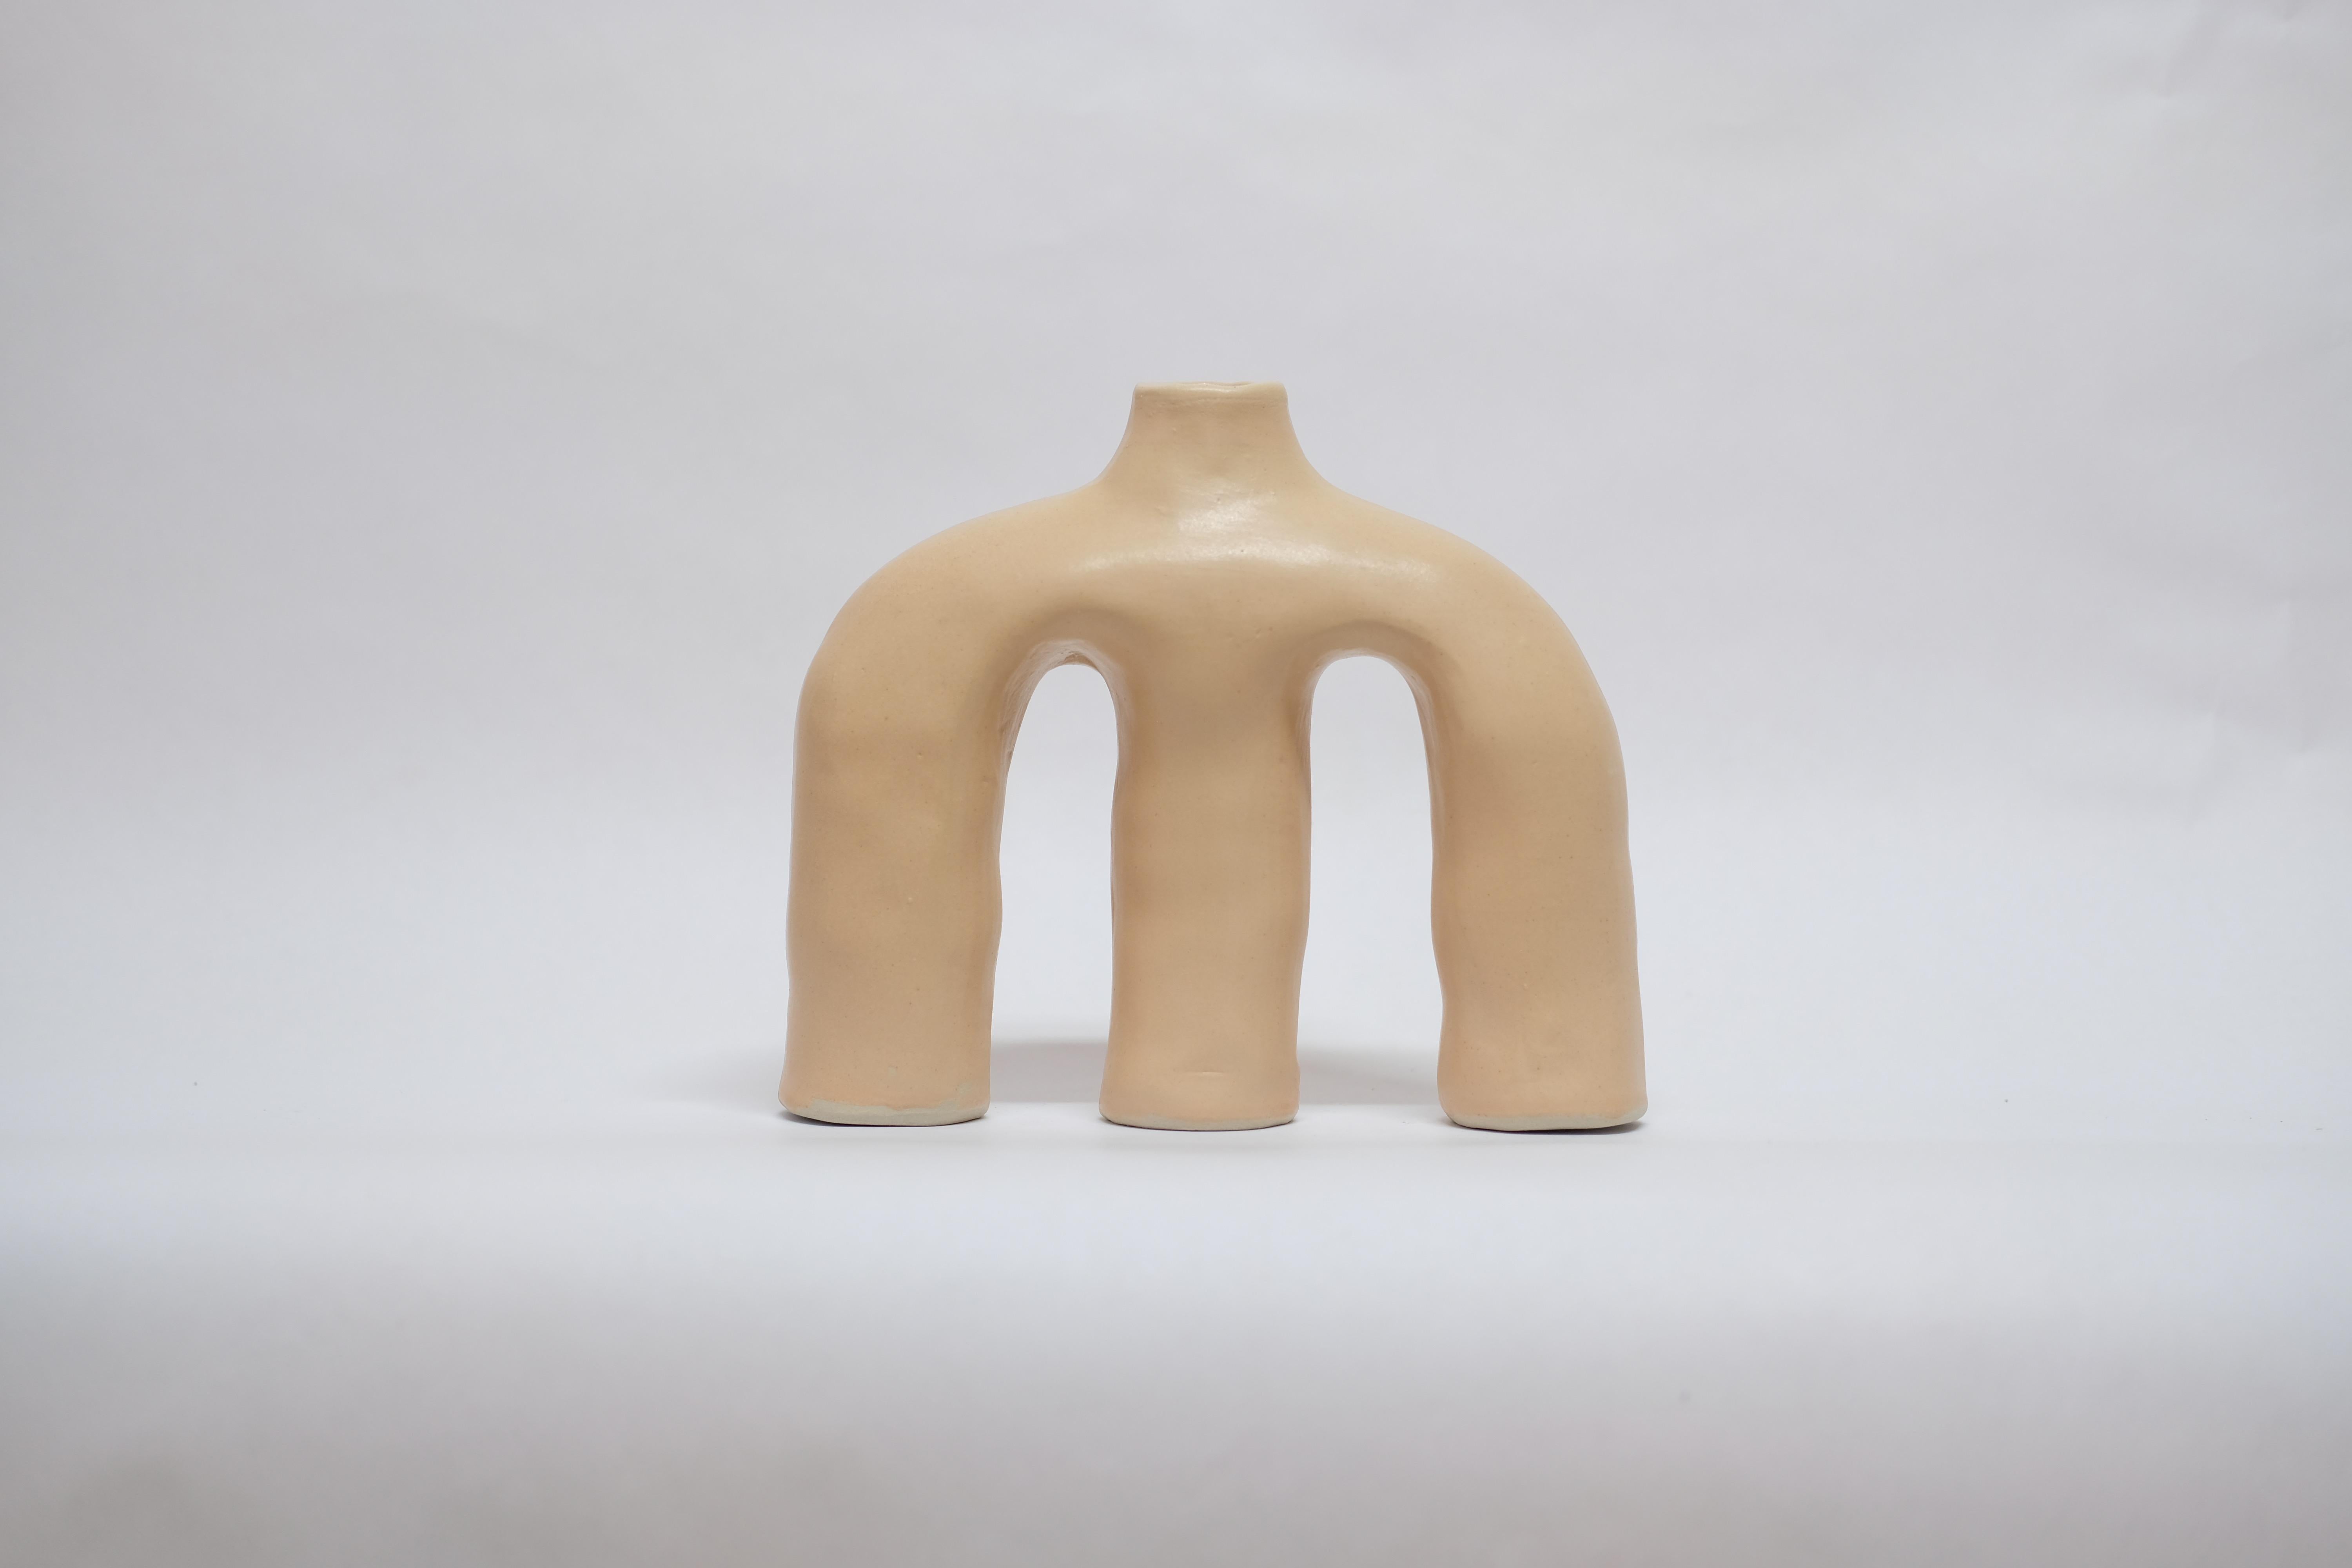 Butter milk anatomía sutil stoneware vase by Camila Apaez
One of a kind
Materials: Stoneware
Dimensions: 25 x 8 x 22 cm
Options: White bone, butter milk, charcoal black

This year has been shaped by the topographies of our homes and the